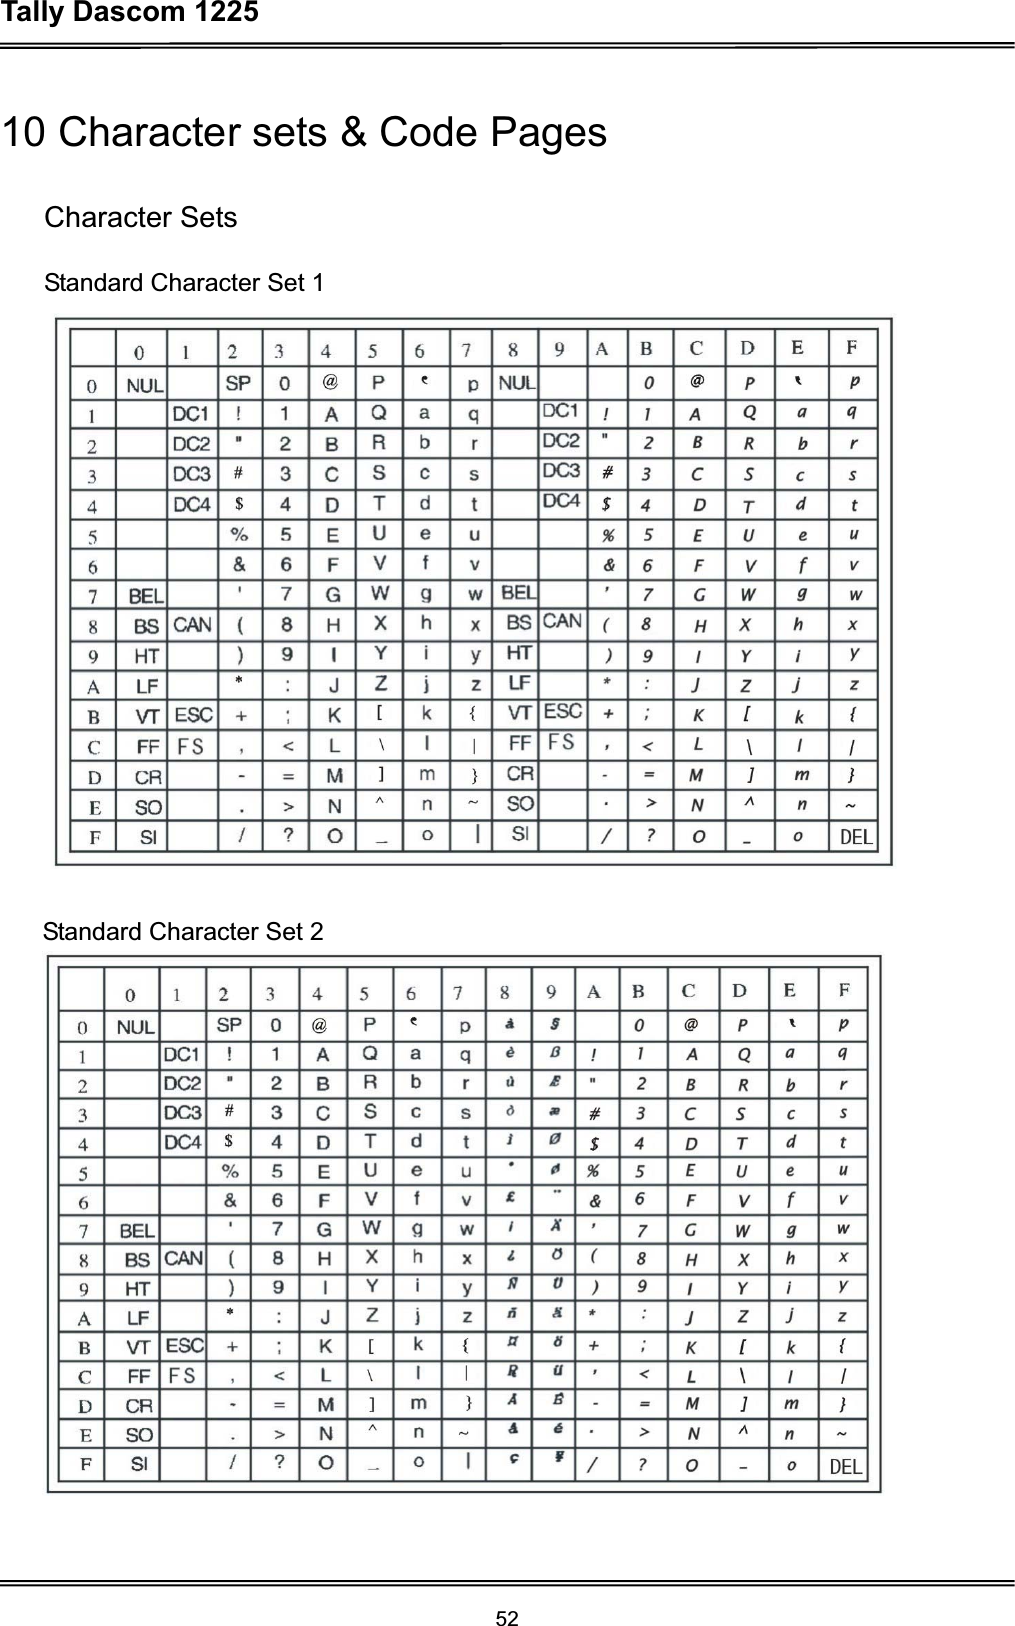 Tally Dascom 1225 5210 Character sets &amp; Code Pages Character Sets Standard Character Set 1Standard Character Set 2 